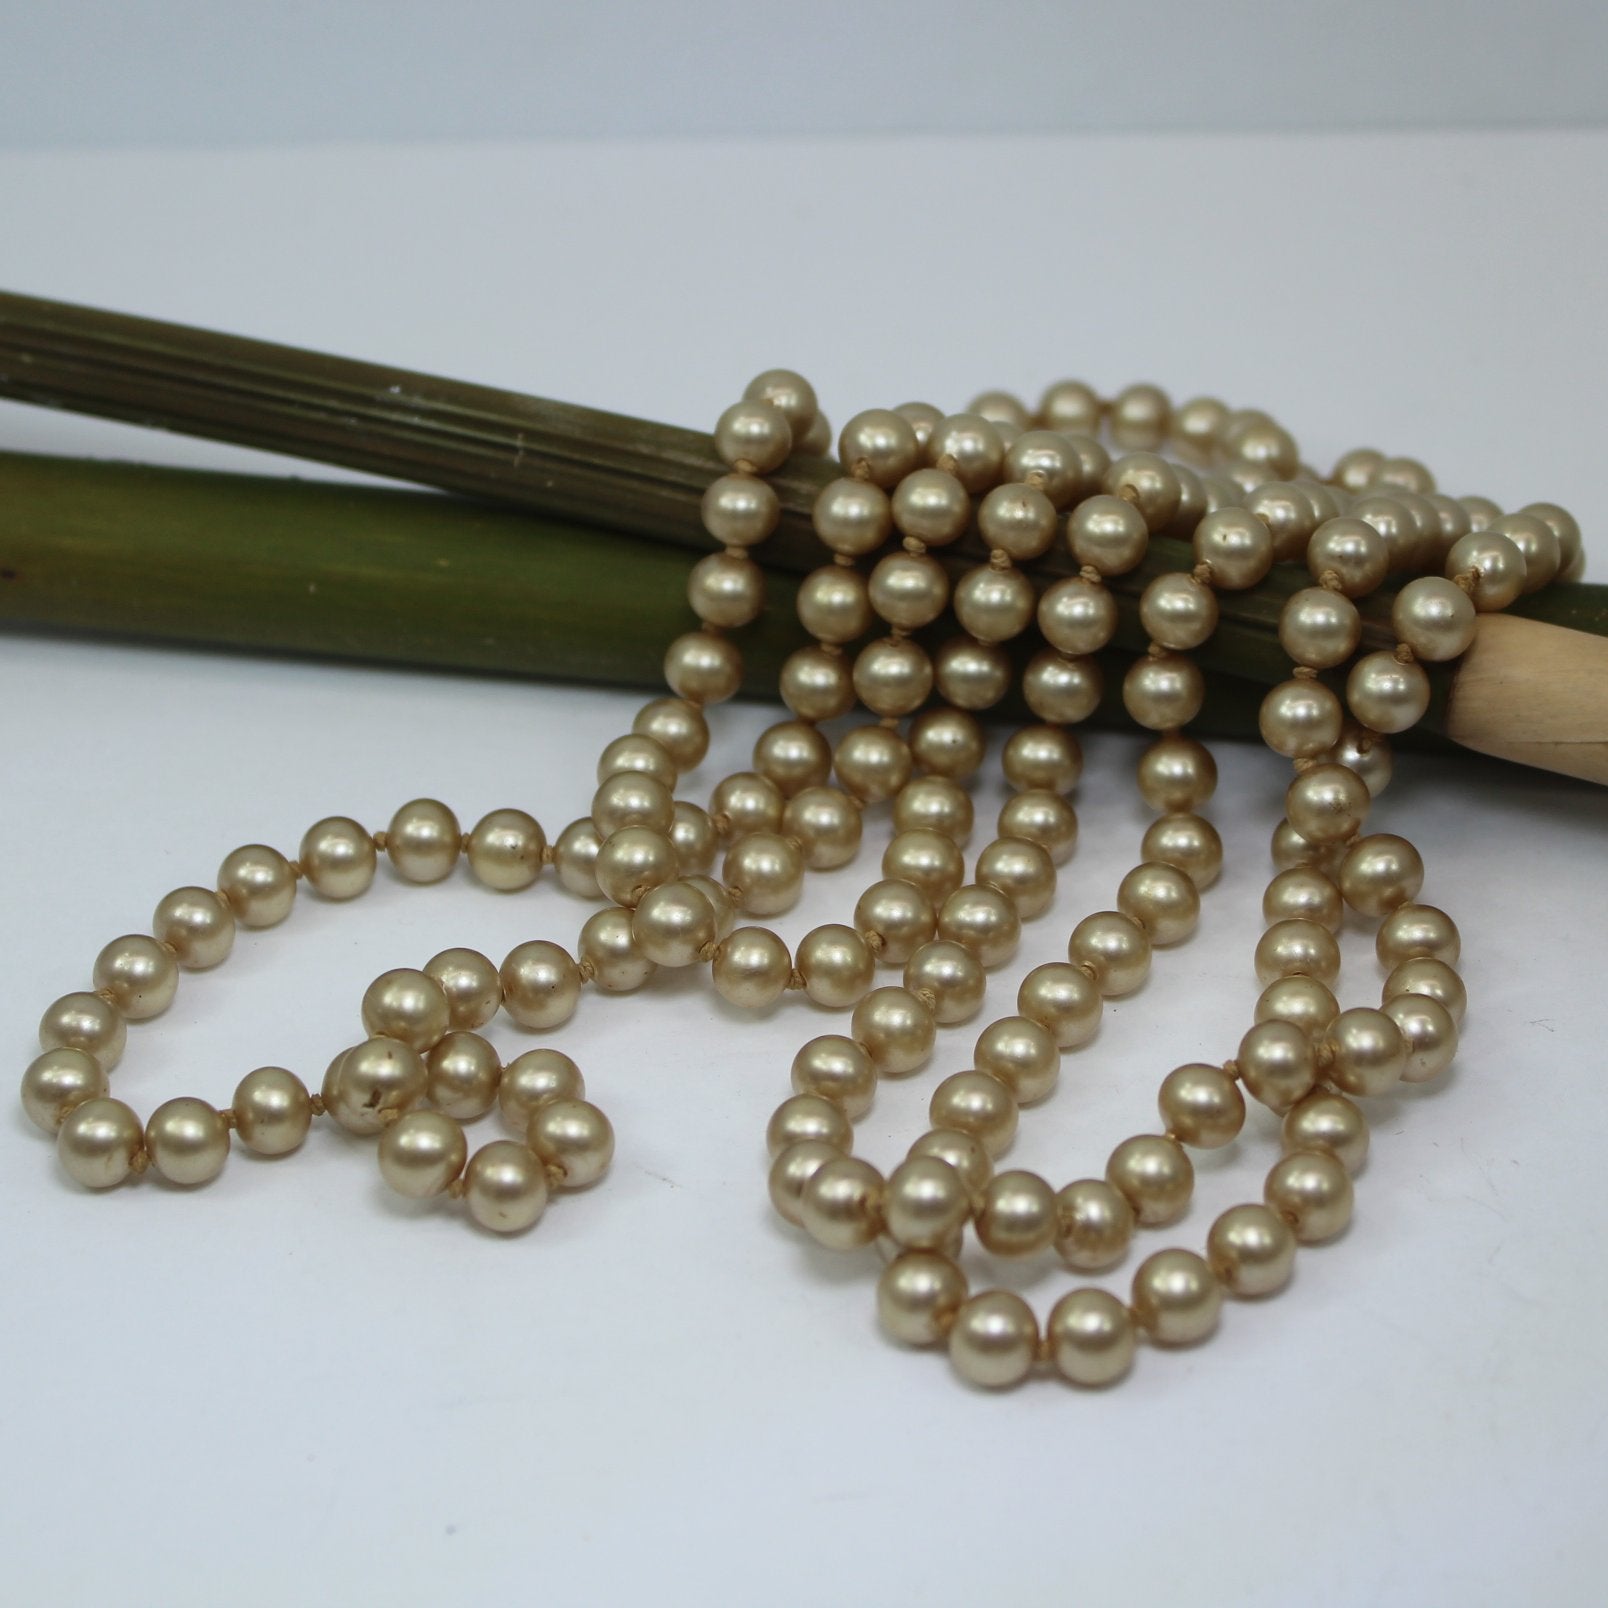 Rope Length 57" Necklace Faux Champagne Pearls Individually Knotted Vintage